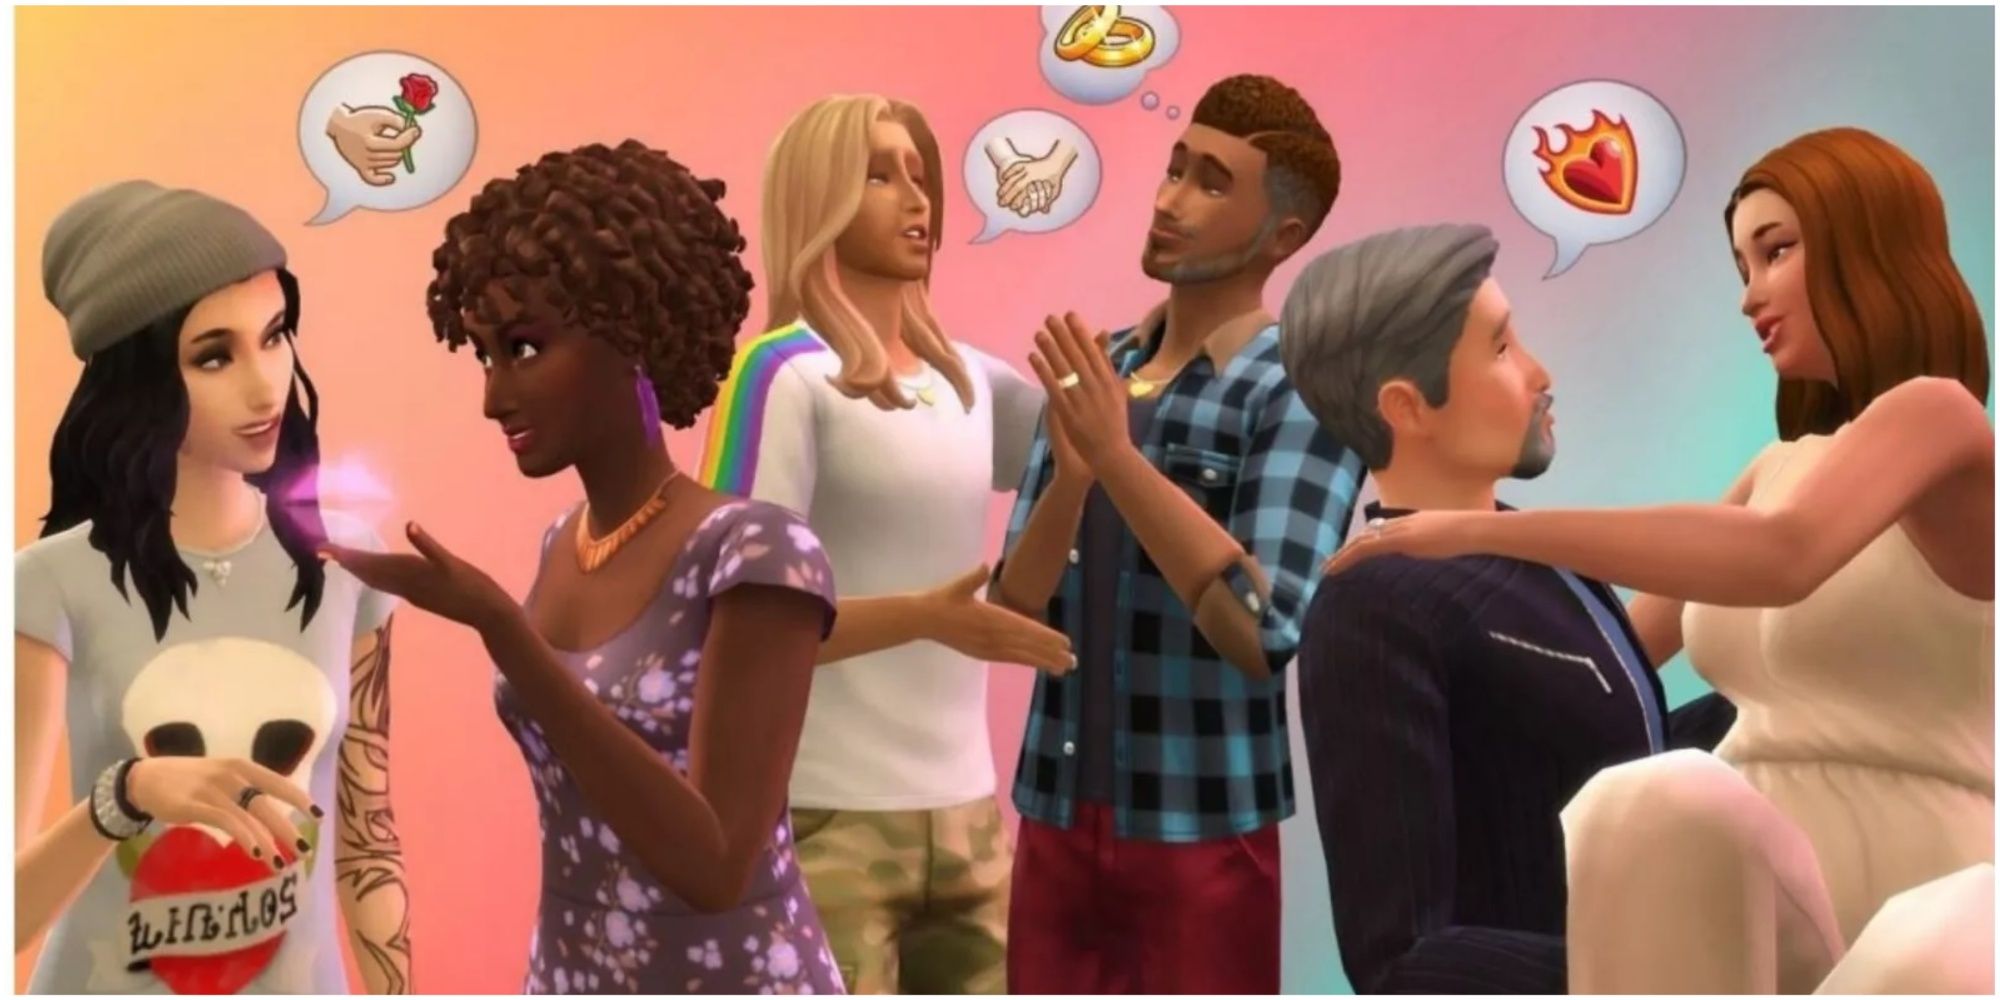 Flirting and Conversations in The Sims 4